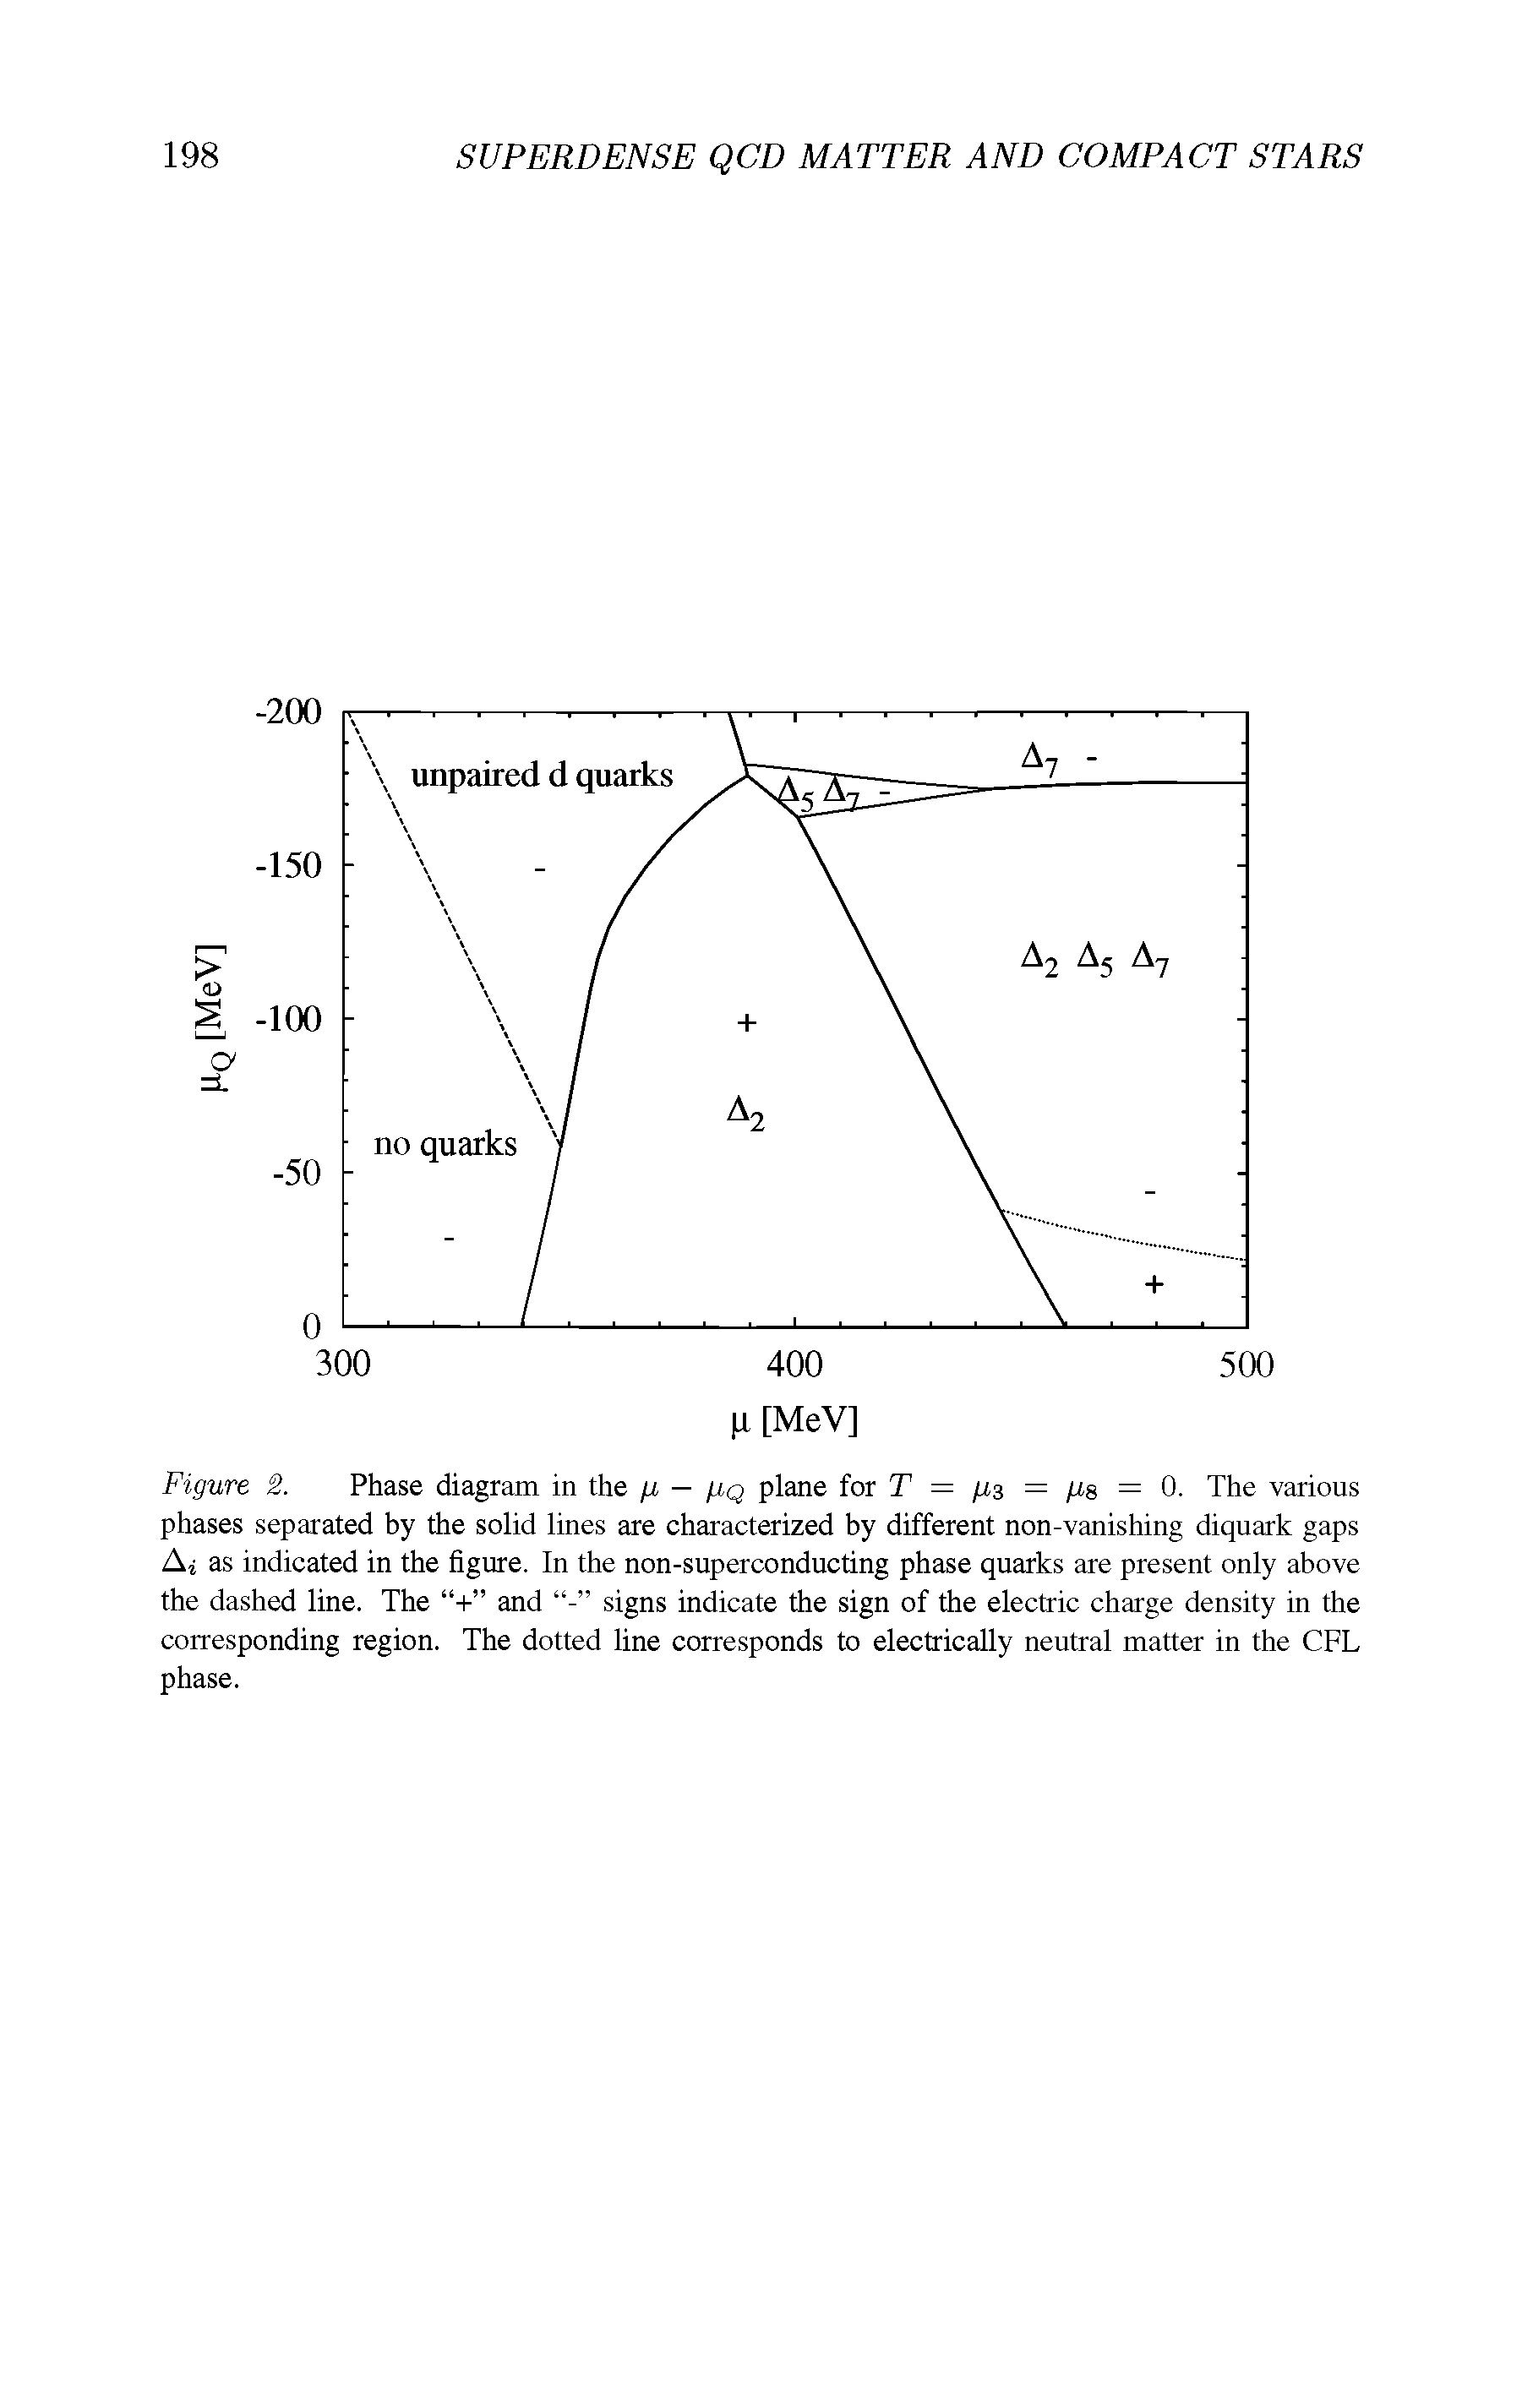 Figure 2. Phase diagram in the /u — (iq plane for T = /U3 = /us = 0. The various phases separated by the solid lines are characterized by different non-vanishing diquark gaps Ai as indicated in the figure. In the non-superconducting phase quarks are present only above the dashed line. The + and signs indicate the sign of the electric charge density in the corresponding region. The dotted line corresponds to electrically neutral matter in the CFL phase.